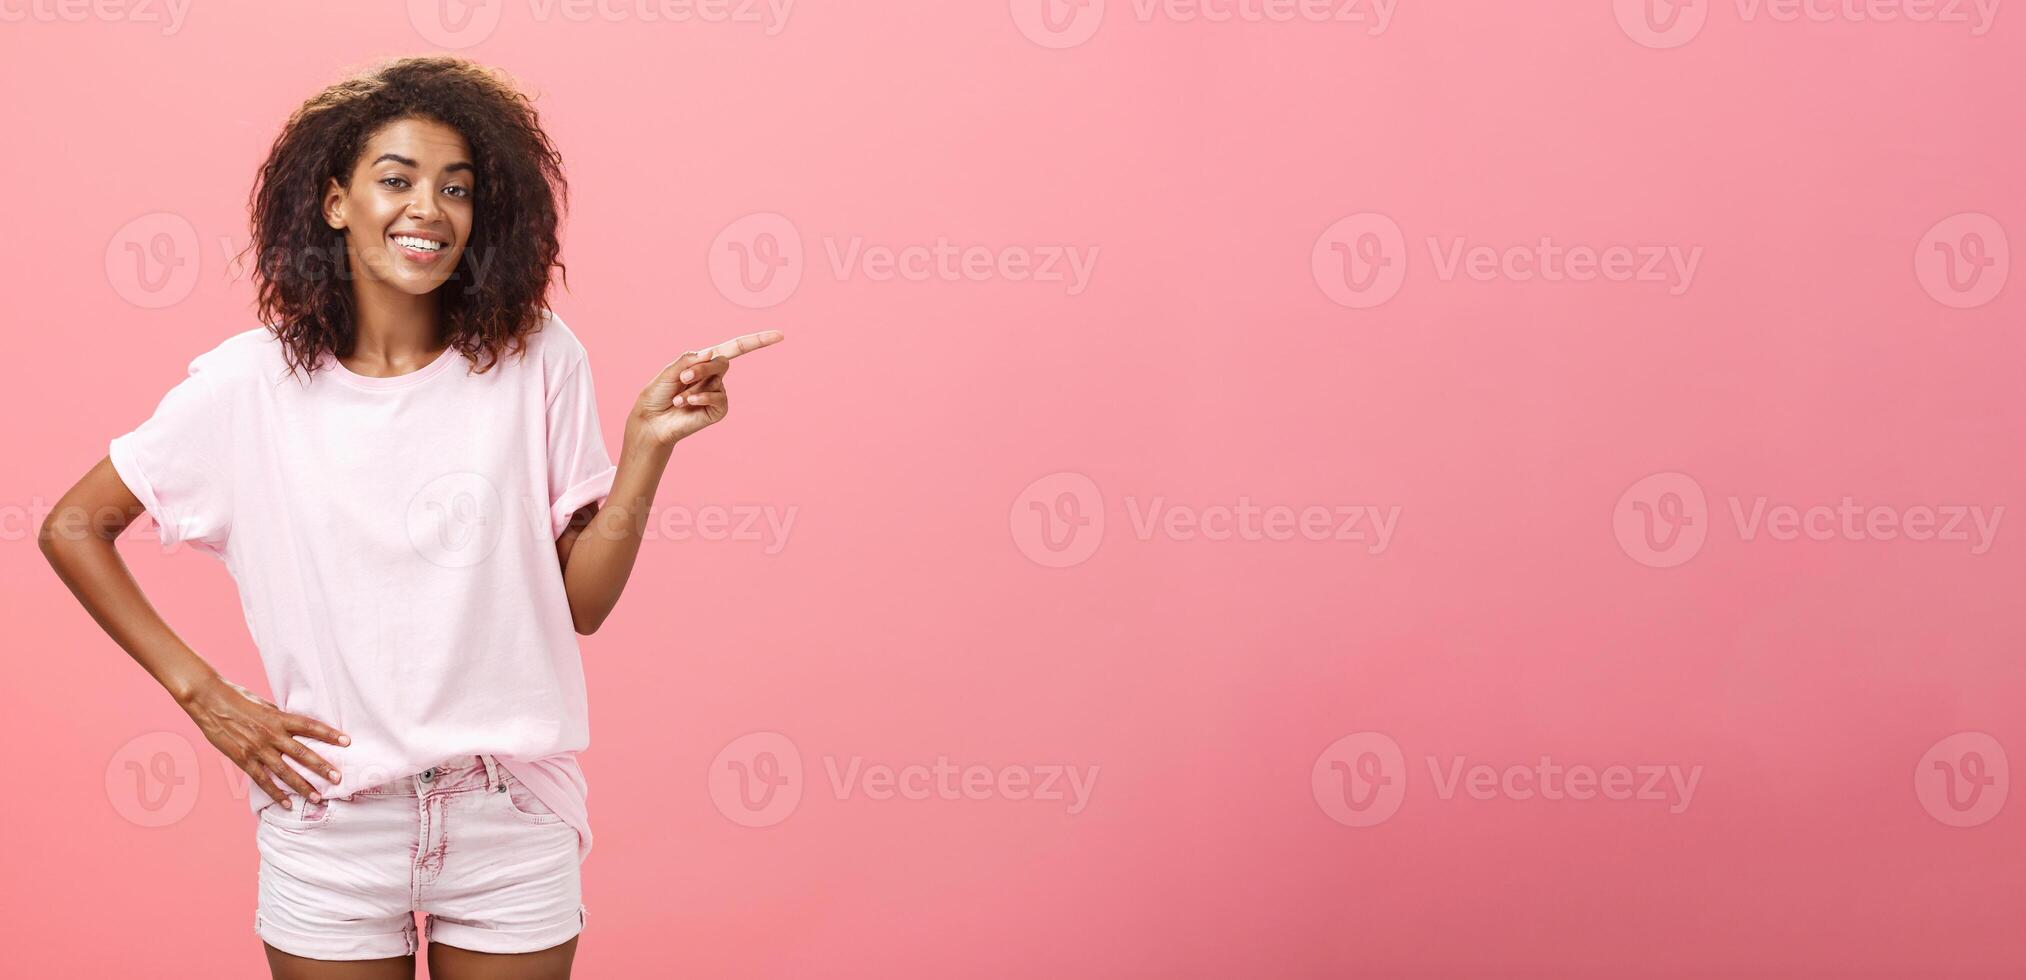 Hey look. Portrait of cute chill and friendly stylish african american woman with afro hairstyle holding hand on waist pointing right and smiling joyfully over pink background photo